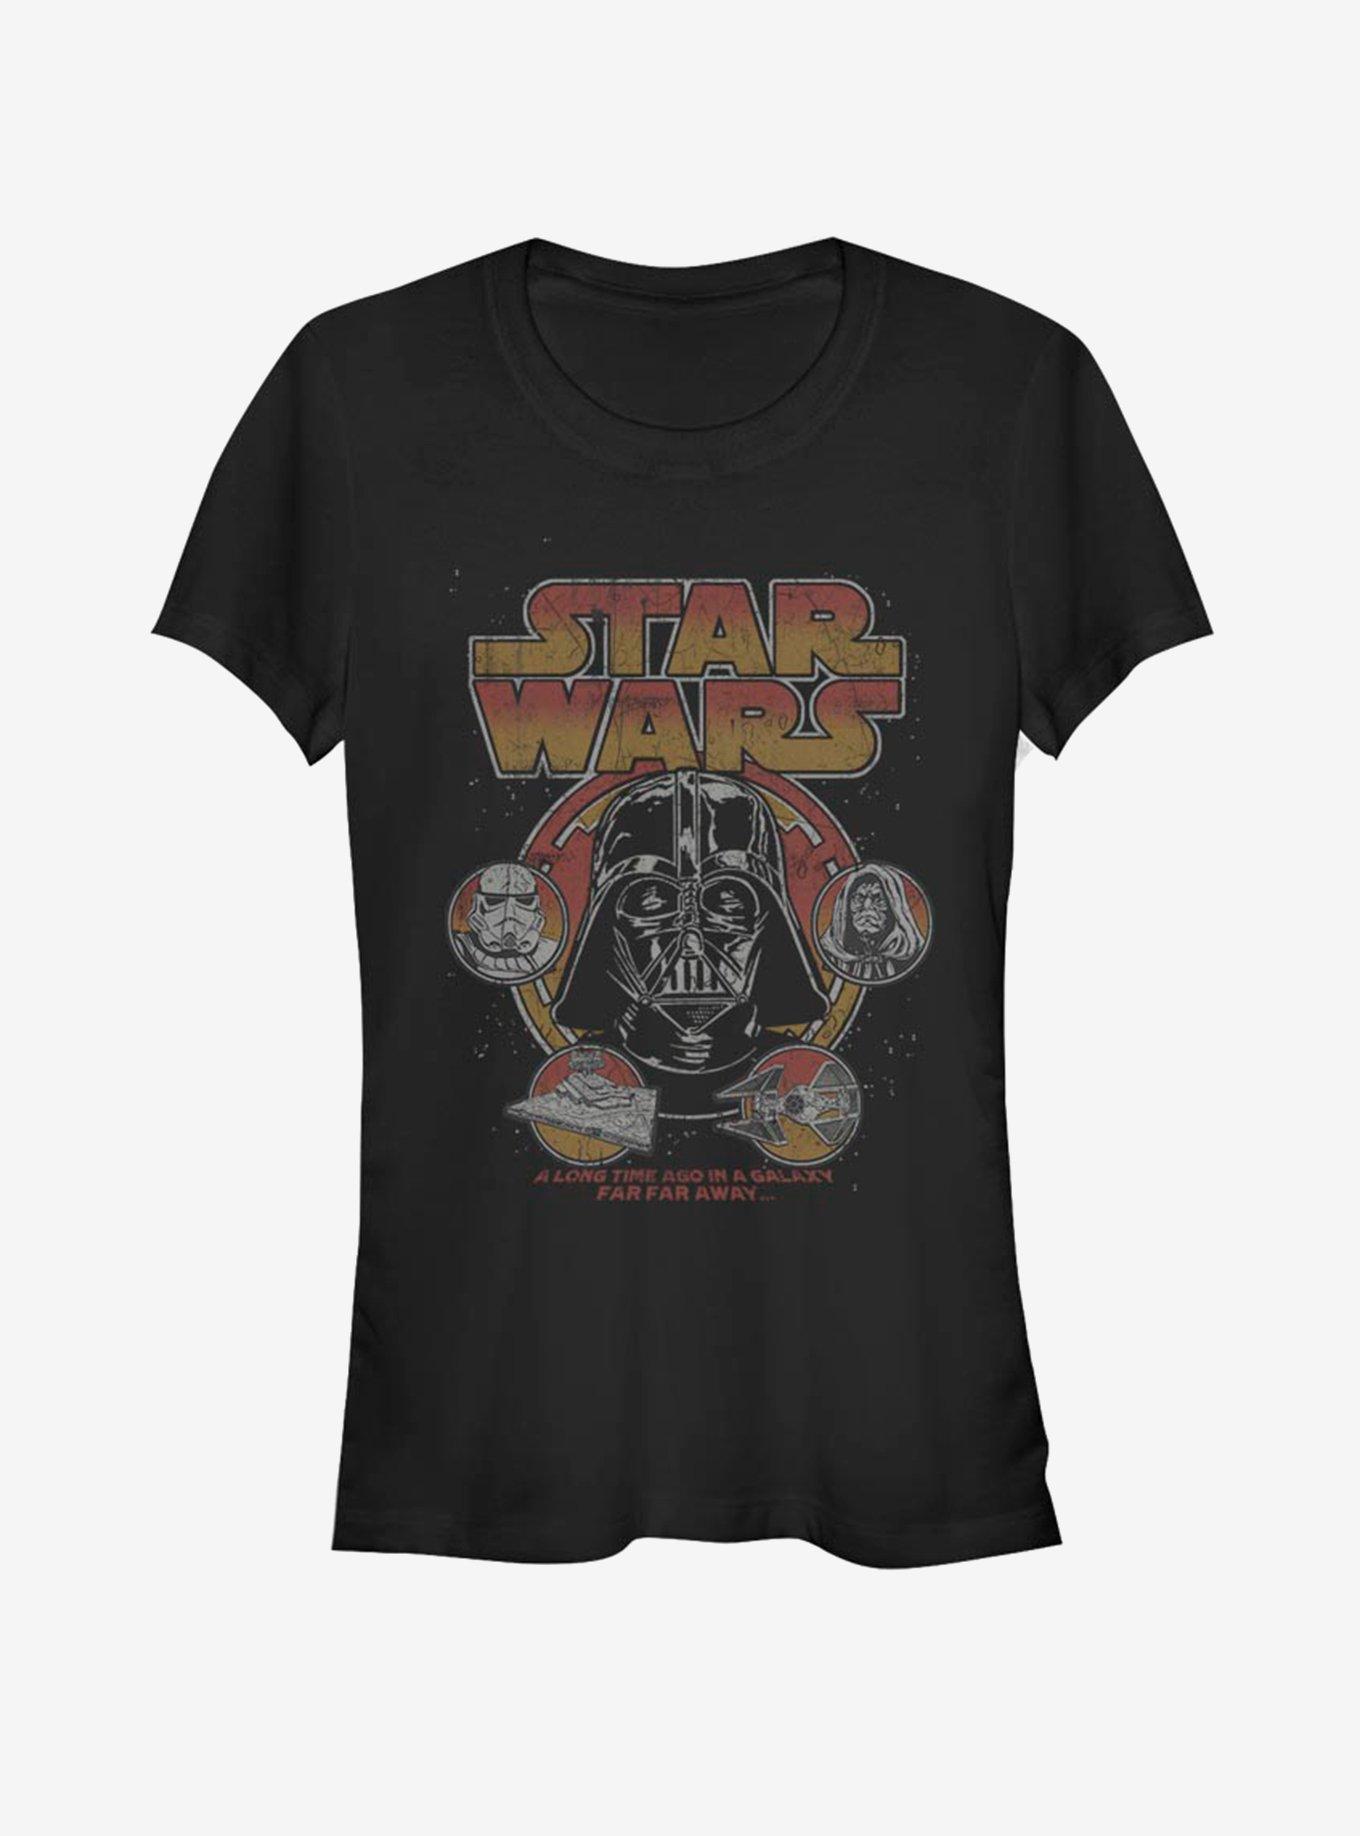 Star Wars Fave Old Tee Girls T-Shirt